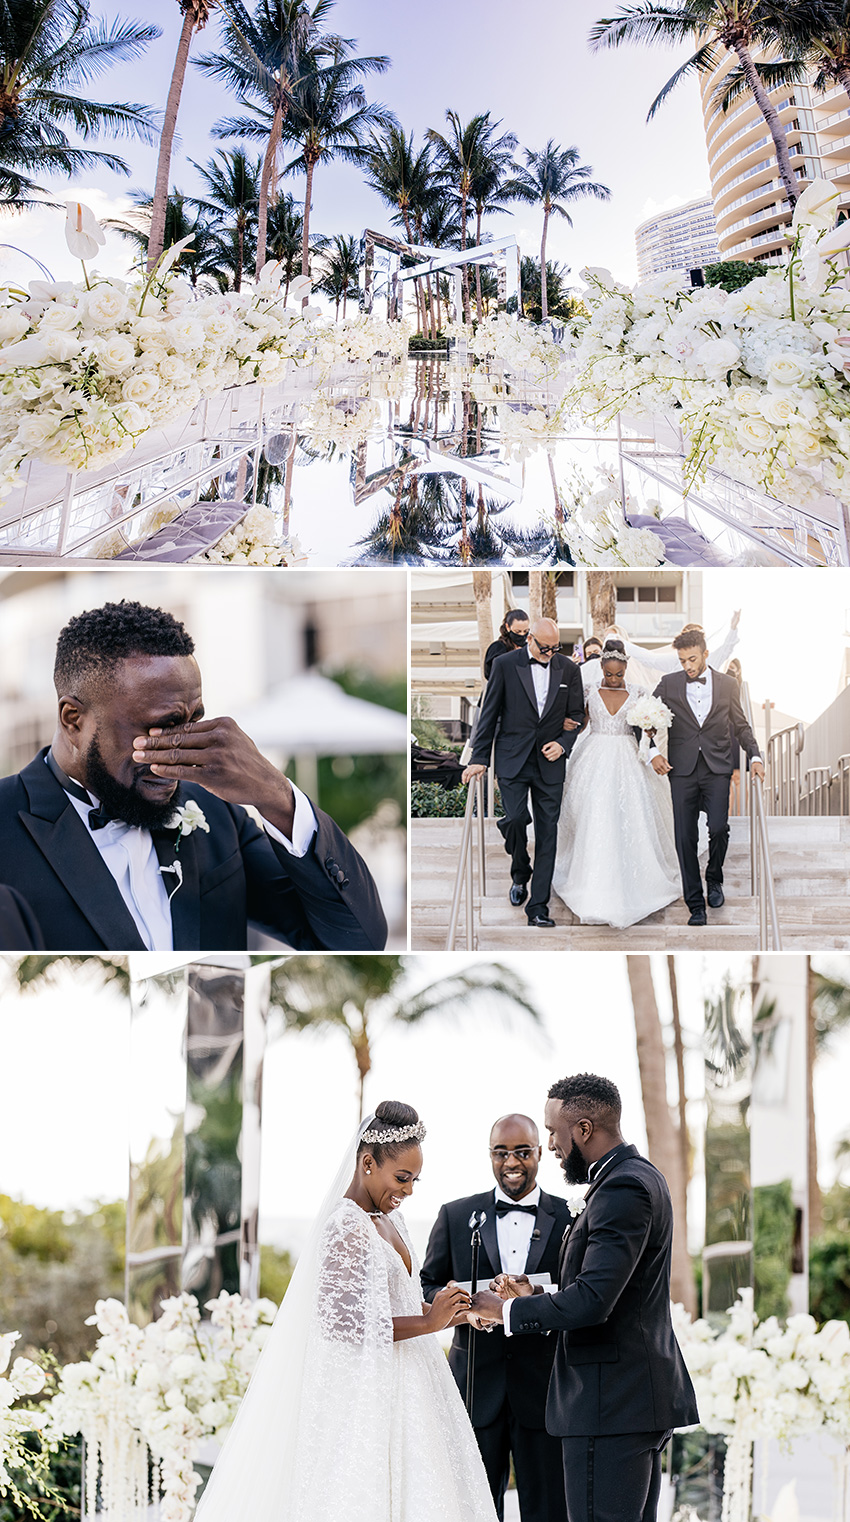 Sloane Stephens marries soccer player Jozy Altidore in the St. Regis Bal Harbour in Miami Beach florida